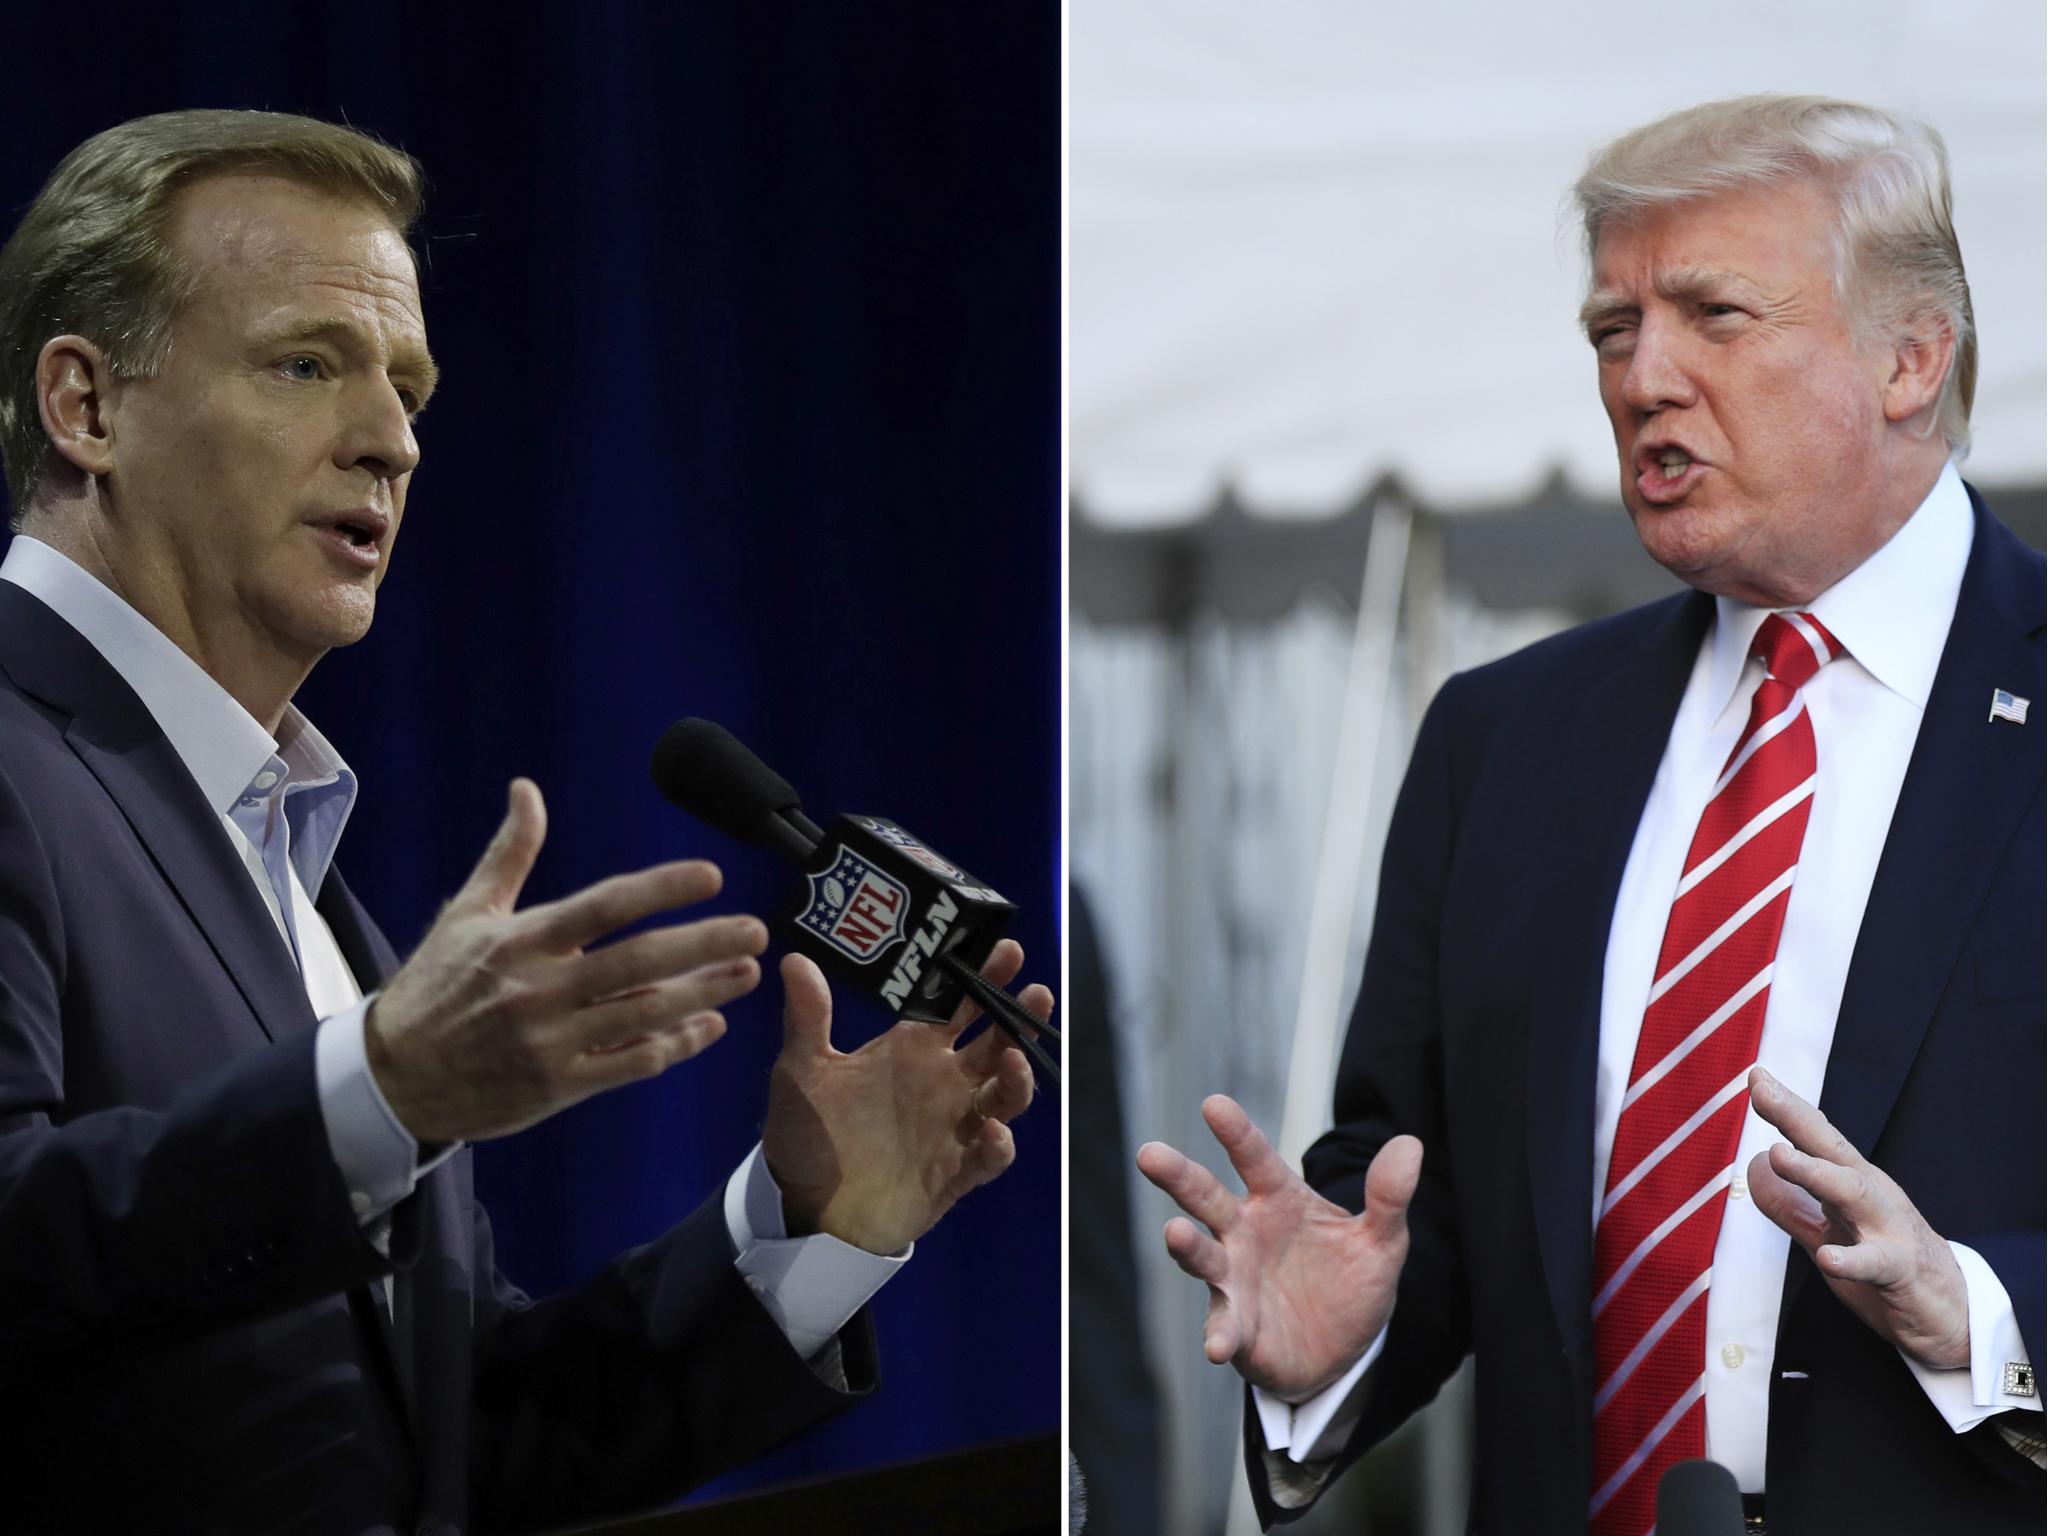 NFL Commissioner Roger Goodell responded to comments by Donald Trump regarding players kneeling during the national anthem in protest